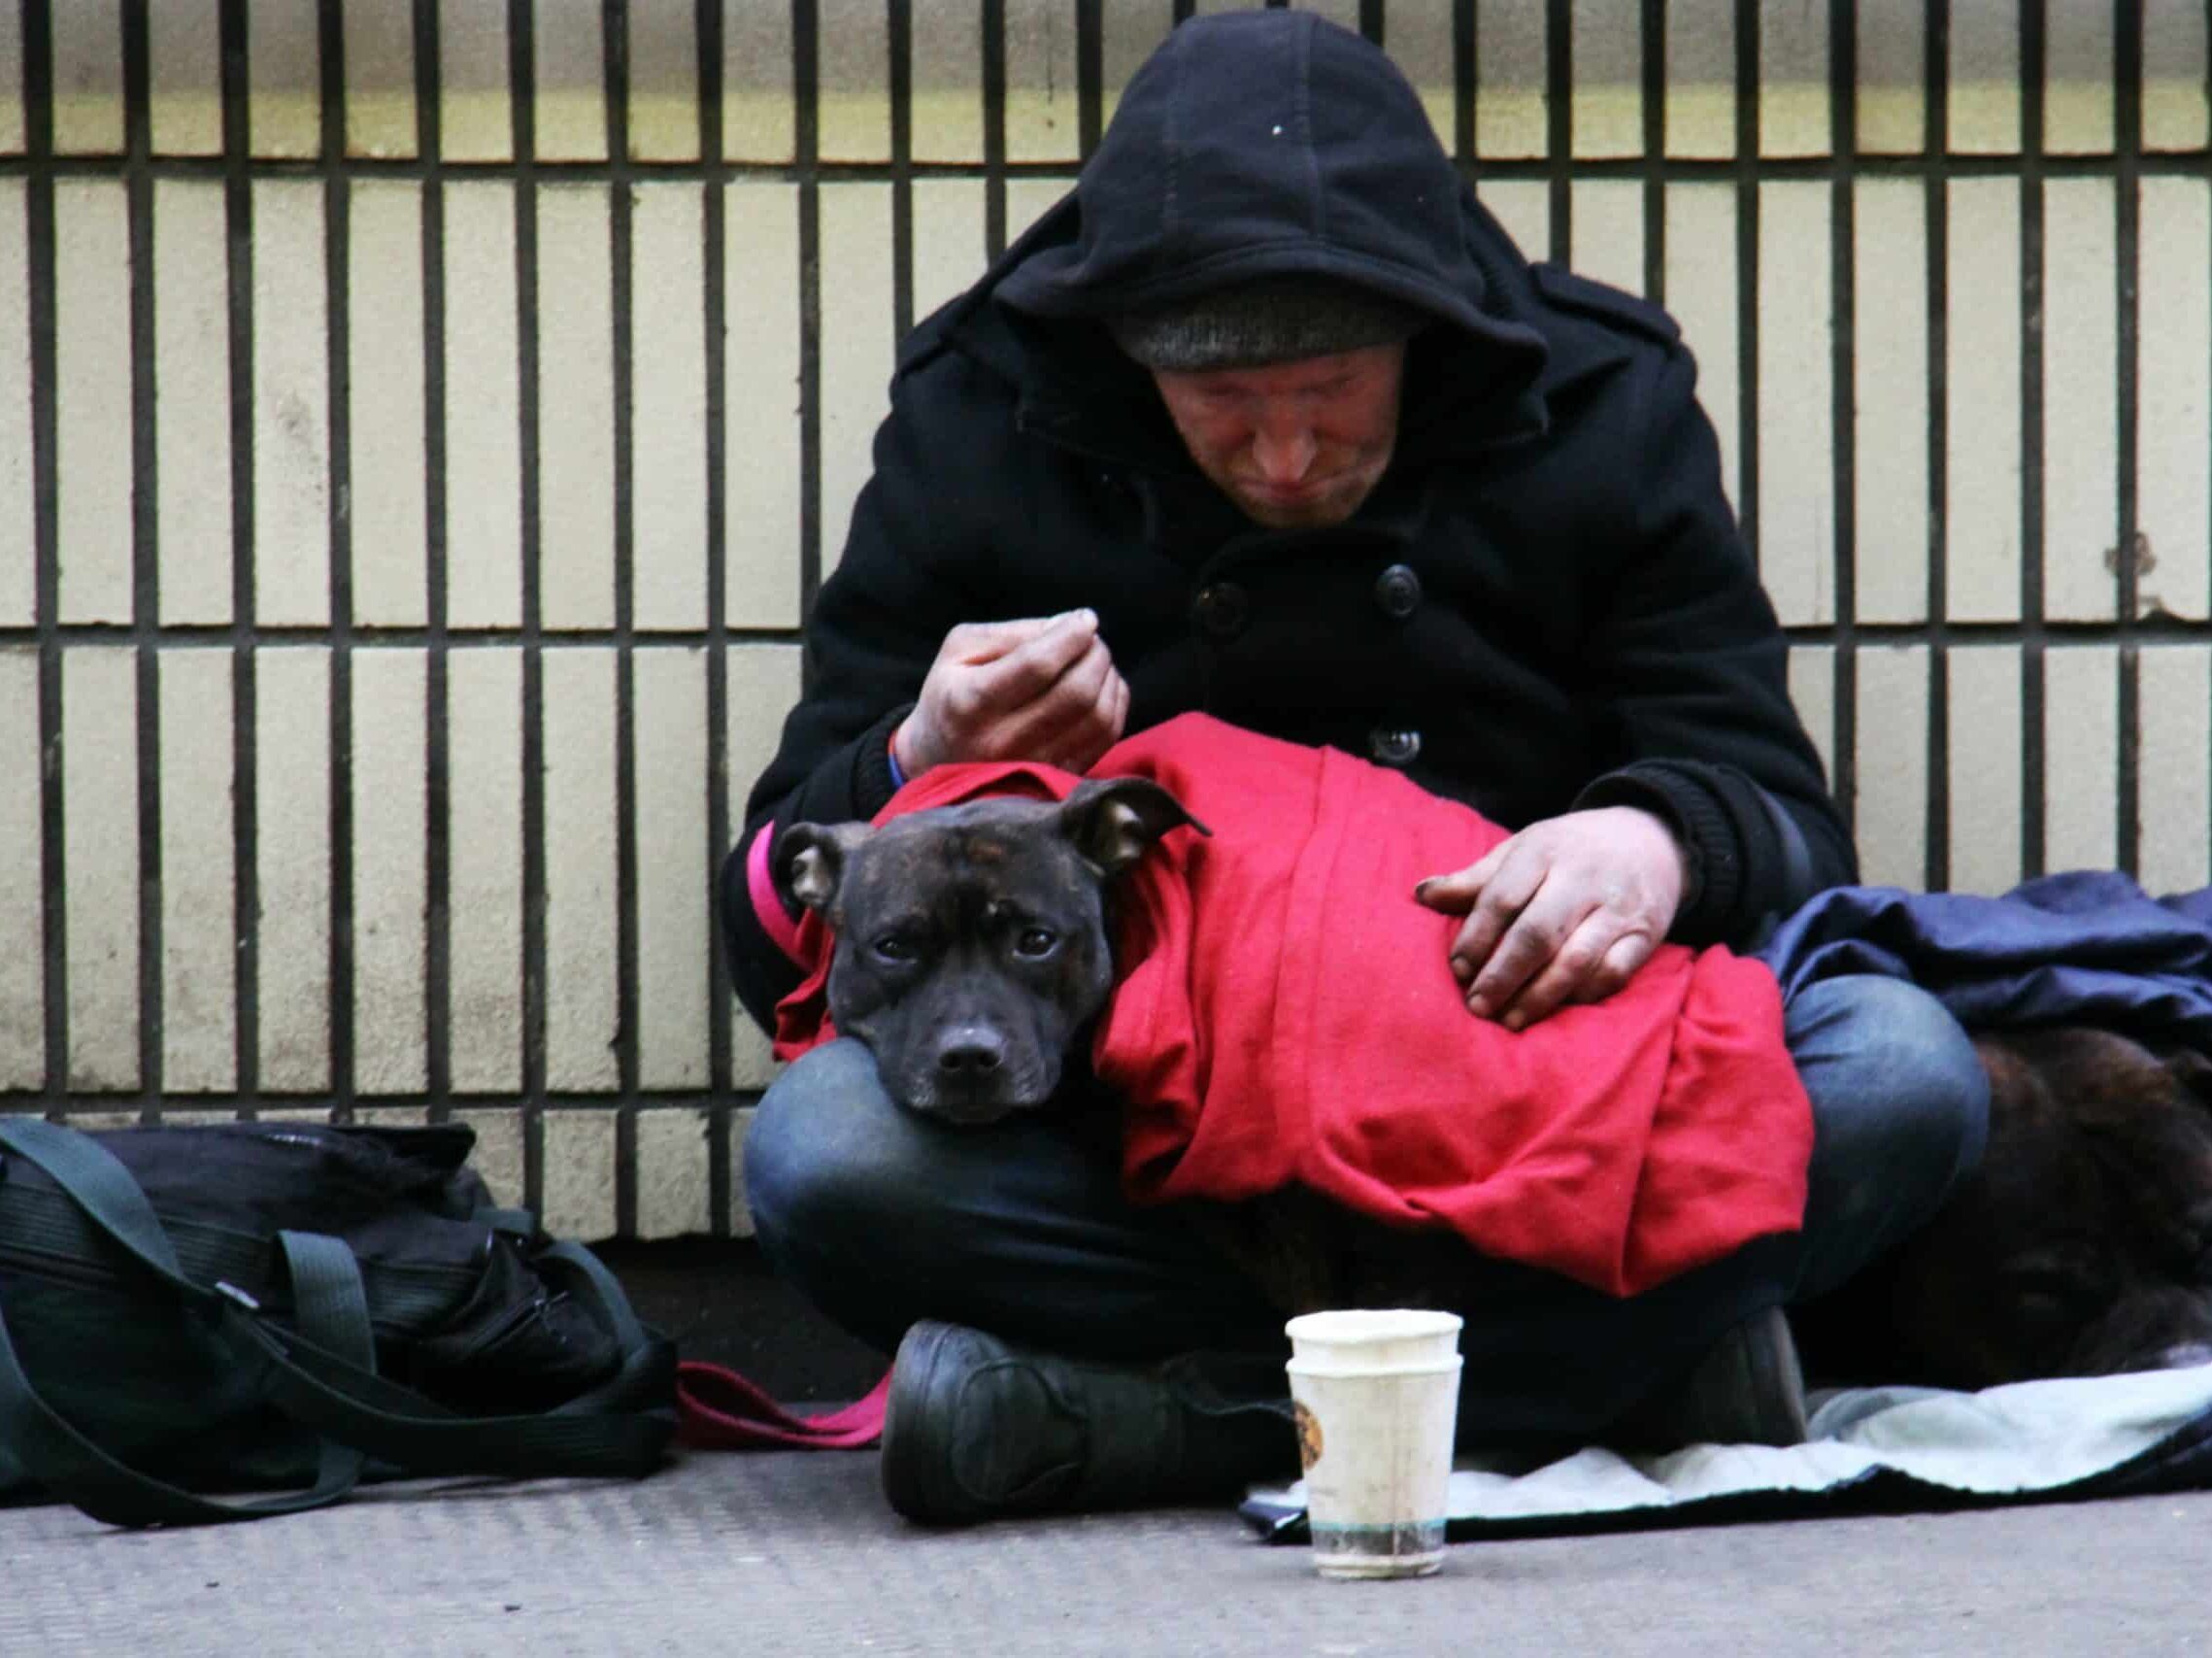 I was working in London and came across this homeless man on the street.  As I went to take this photograph to raise the plight of the homeless, his dog looked right at me with such sorrowful eyes.  It was then that I noticed the larger dog, curled up beside him.  I went to a local store, bought some dog food and him a BK Meal and drink.  Since then, each year, rather than buying Christmas cards for family and friends, I always donate enough money to give a homeless person a shower, clothes and cooked meal and a place to stay on Christmas Day, via the UK charity, Crisis.